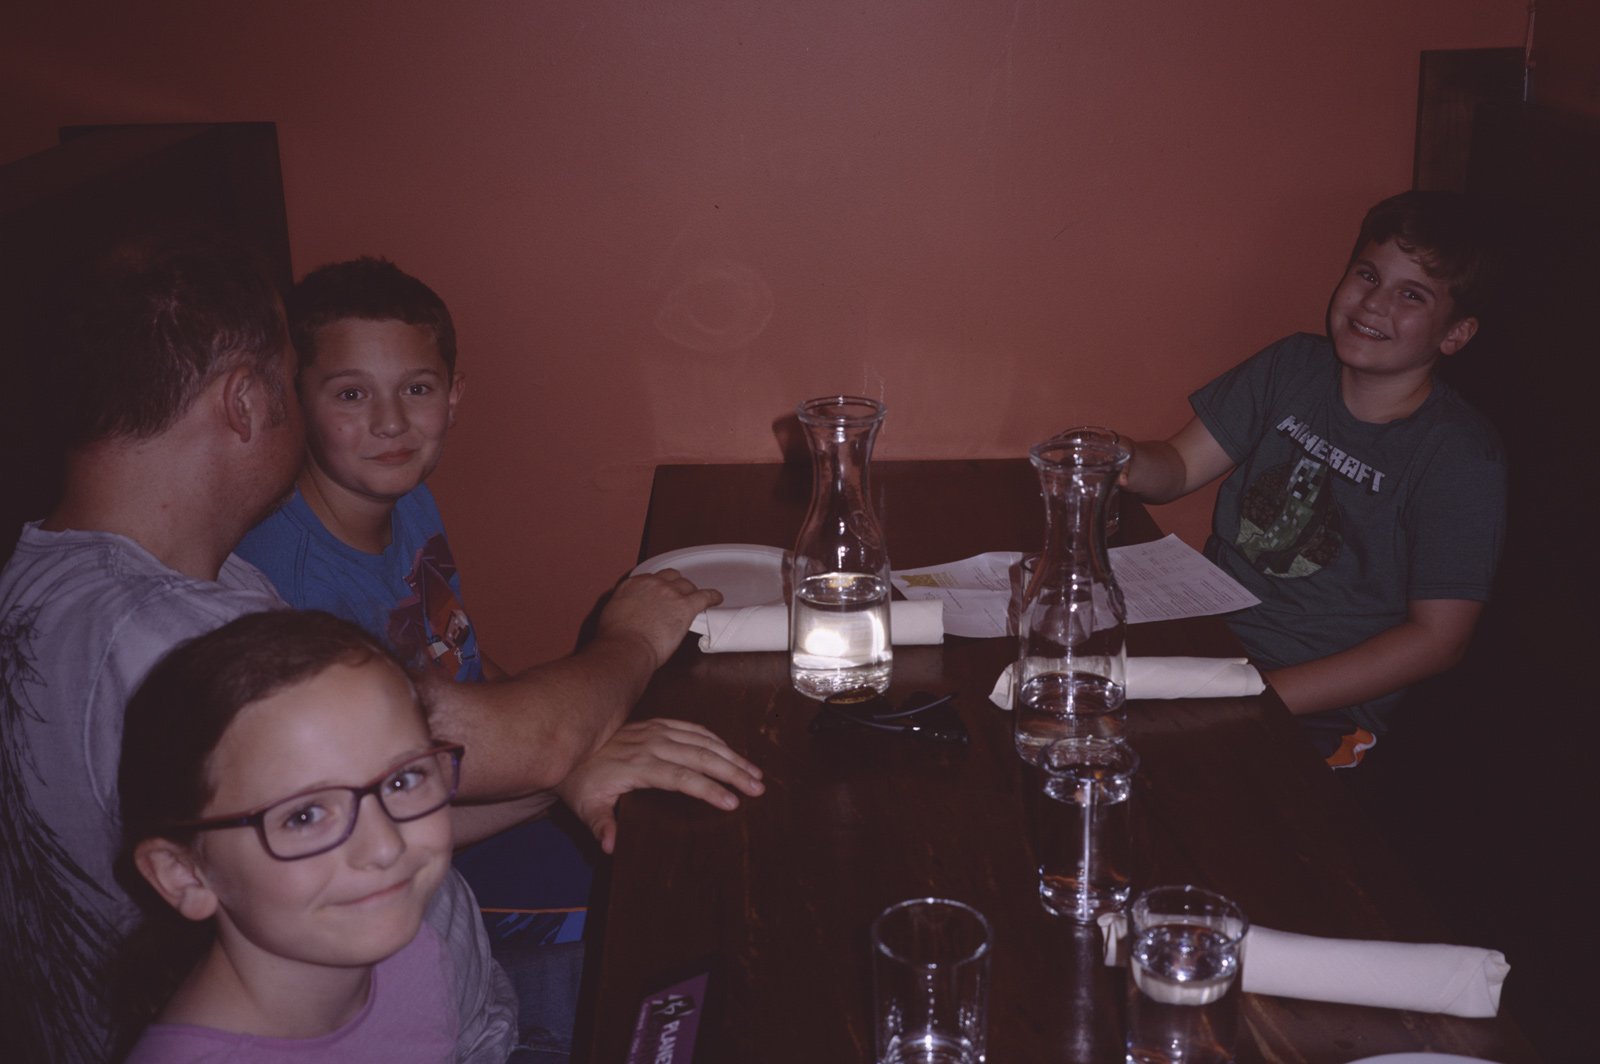 Sophia, Steve, John, and James waiting for food at the organic Mexican restaurant VERDE COCINA